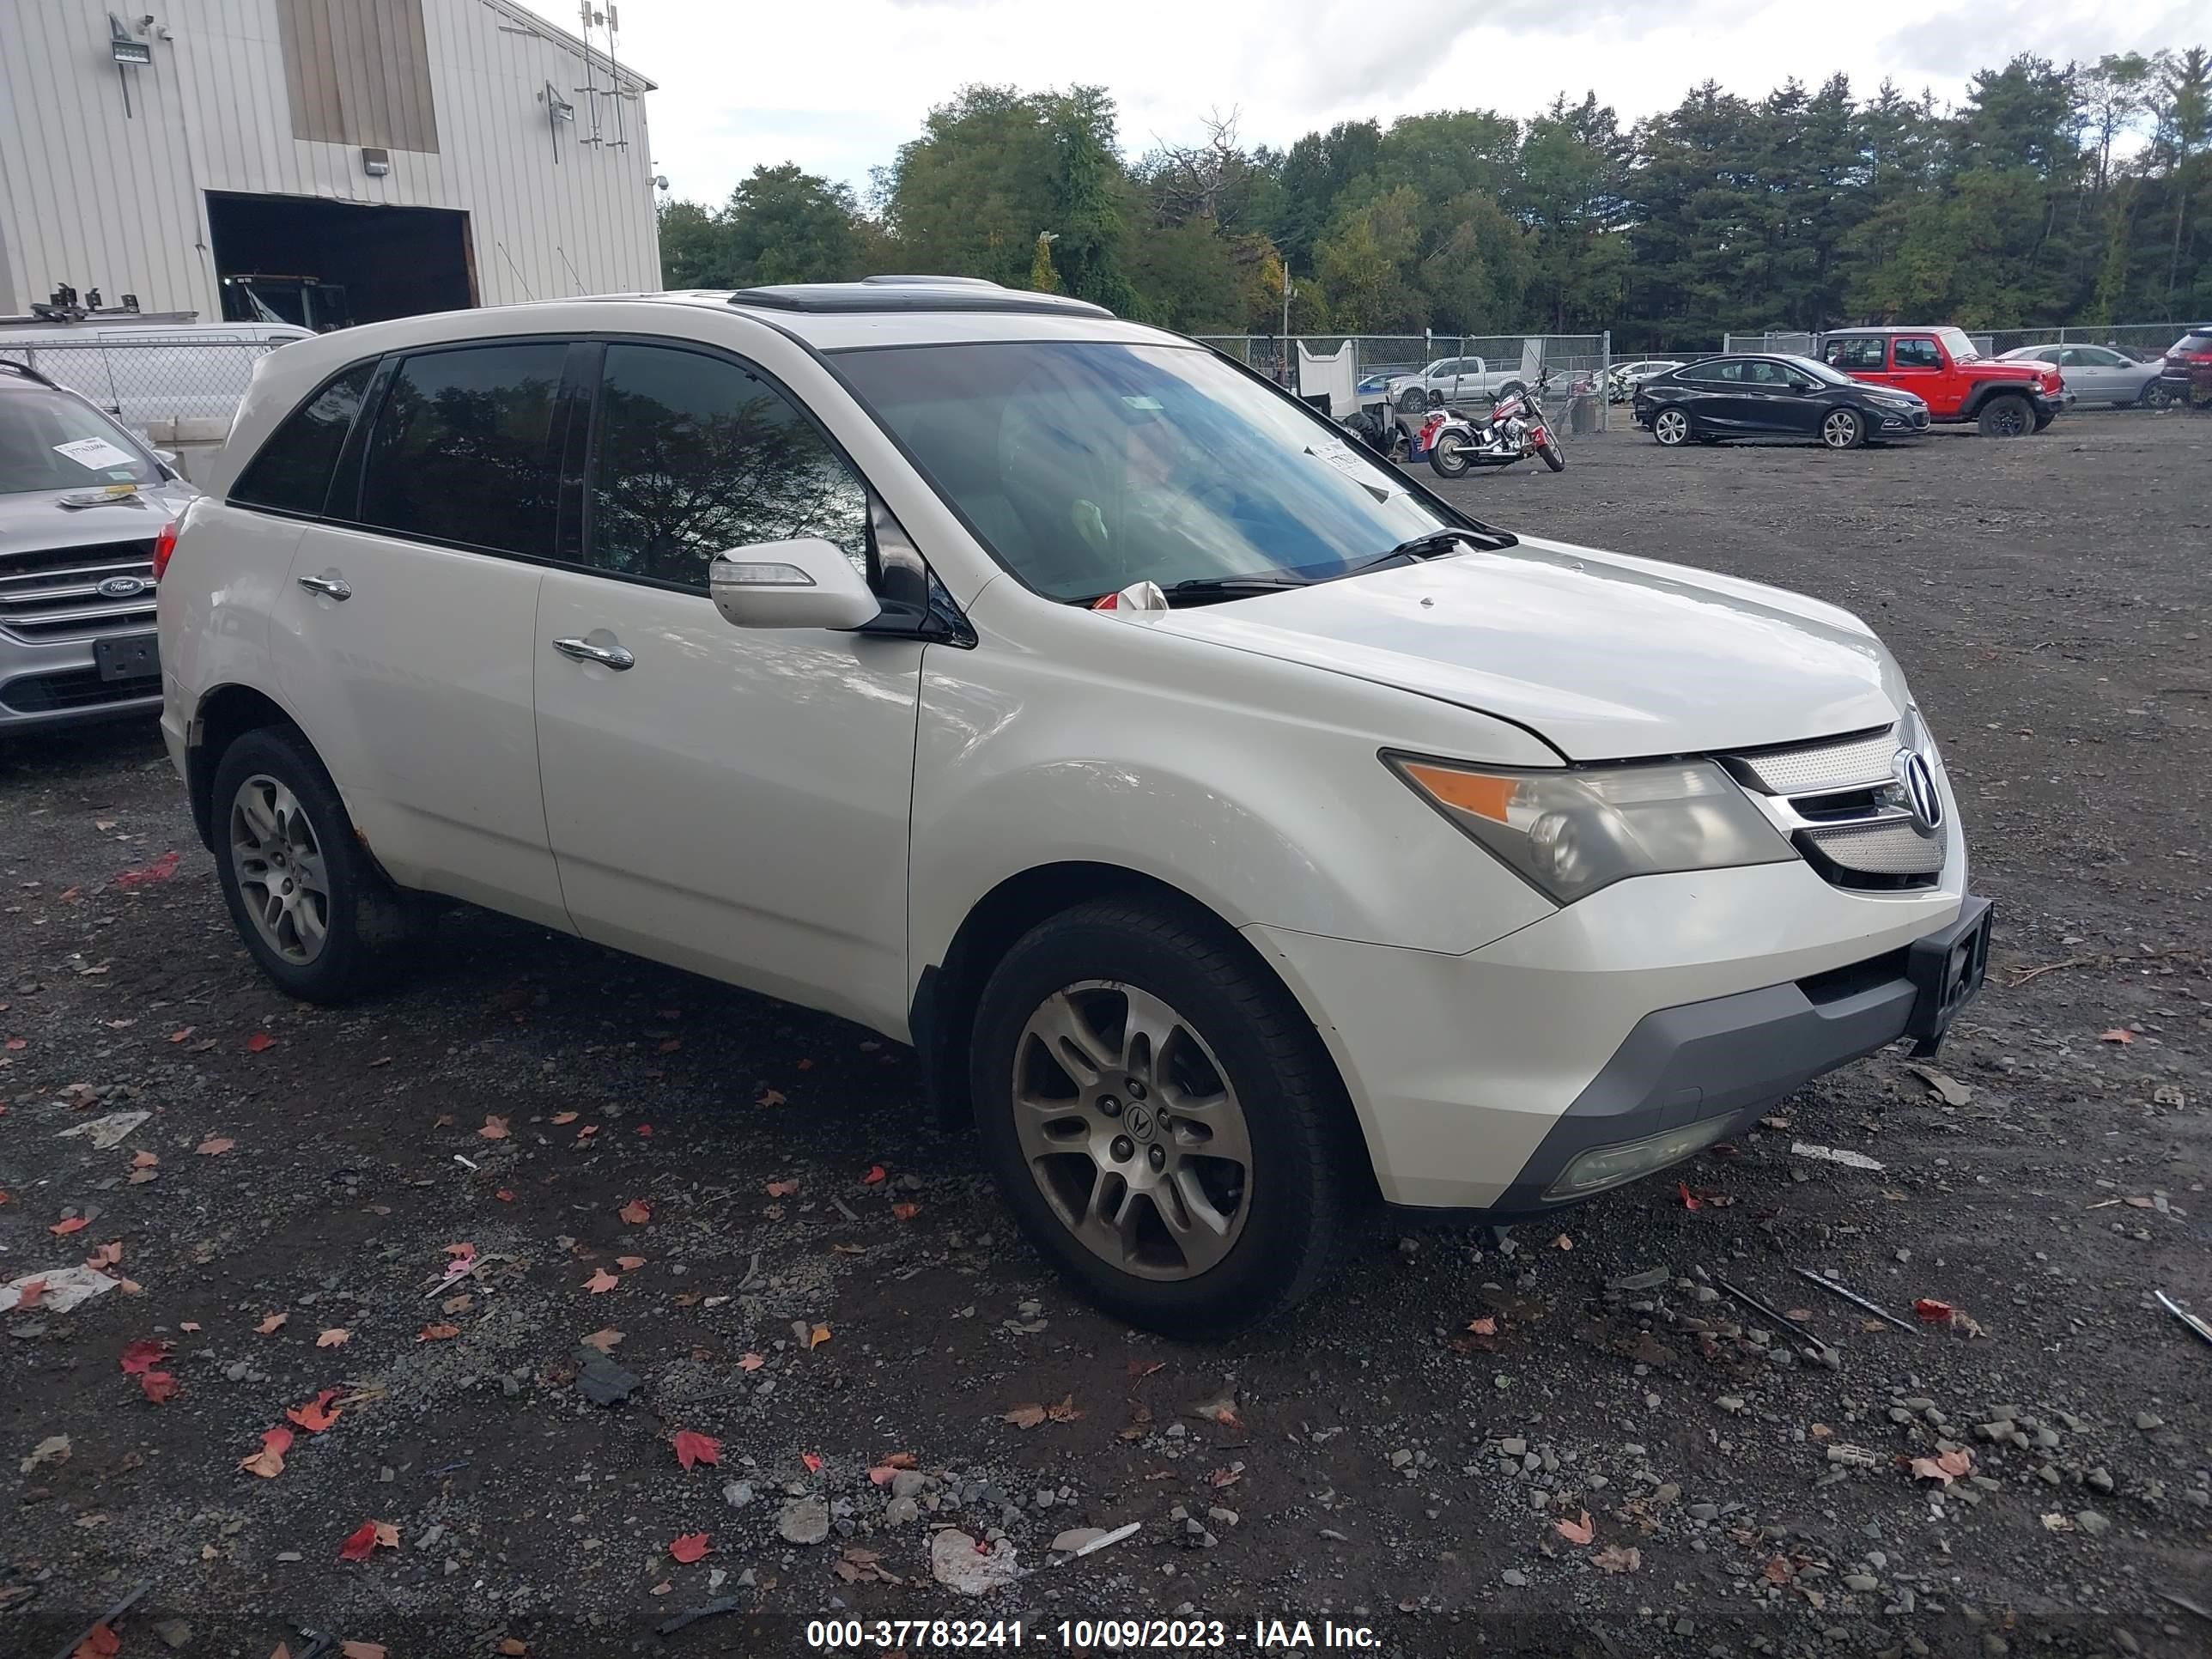 vin: 2HNYD283X8H500427 2HNYD283X8H500427 2008 acura mdx 3700 for Sale in 12303, 1210 Kings Road, Schenectady, New York, USA